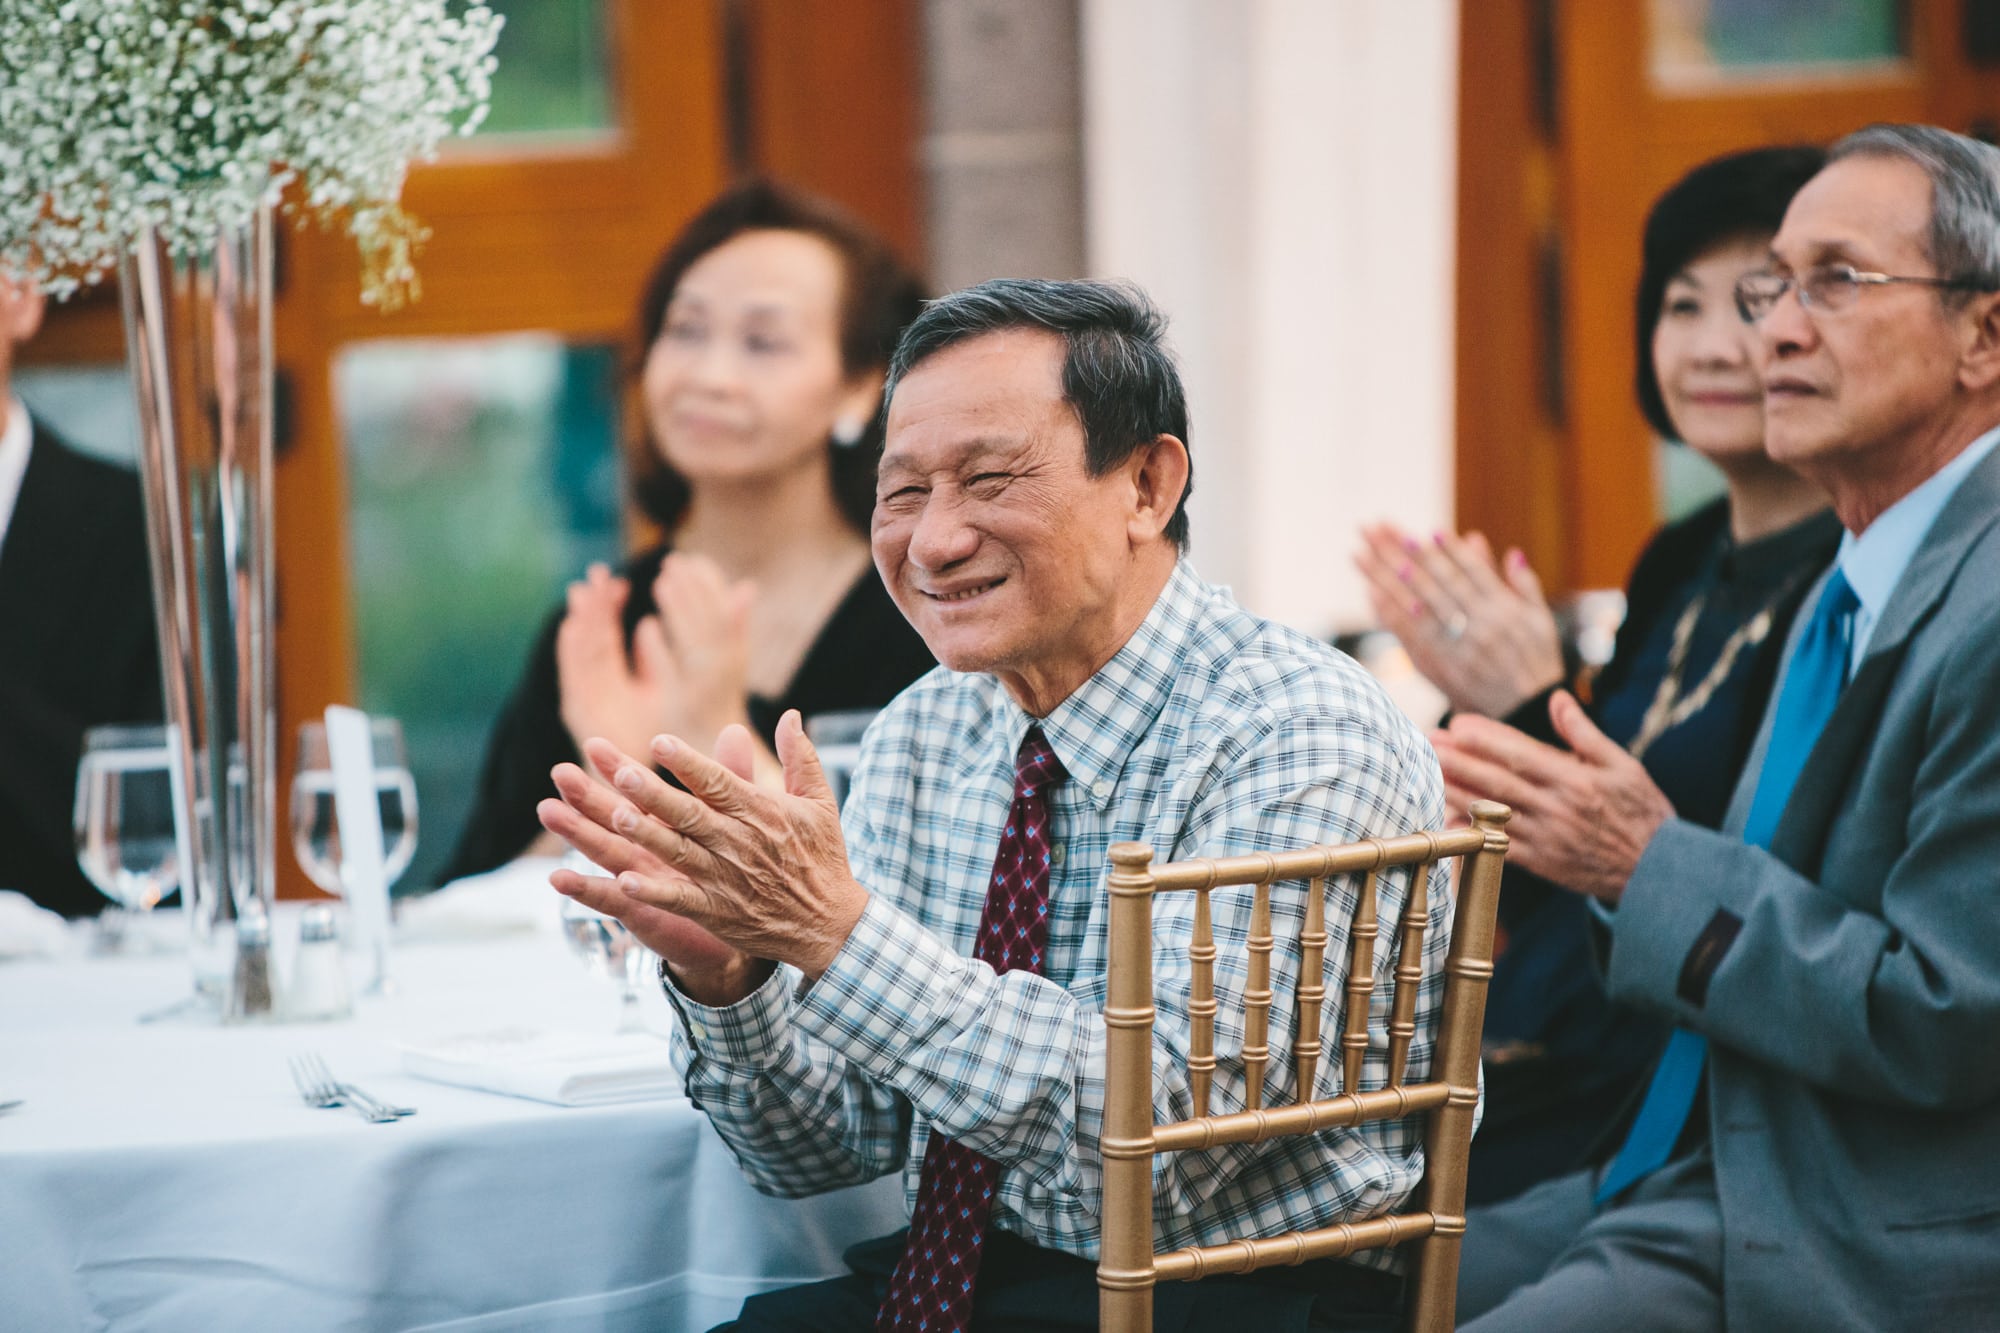 A documentary photograph of a father clapping and smiling during a Tower Hill Wedding Reception in Boylston, Massachusetts